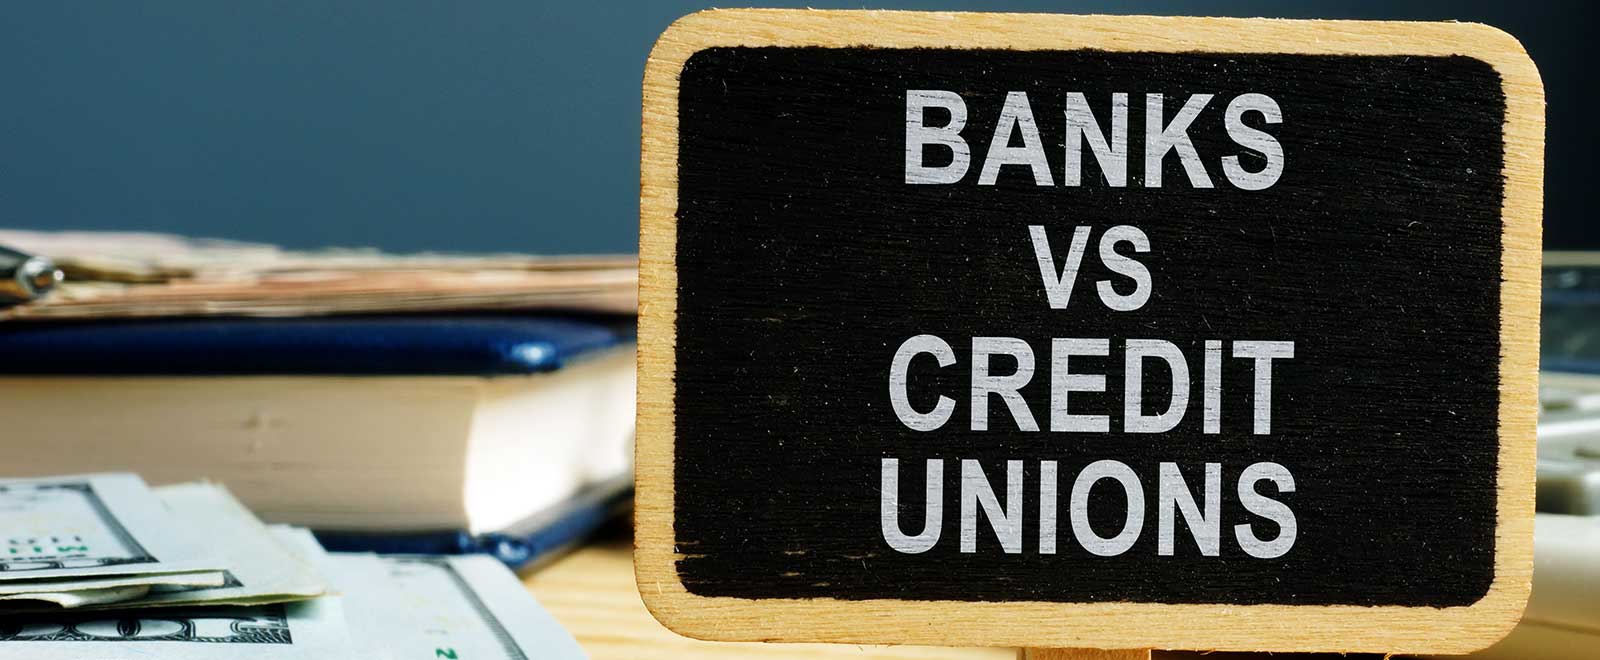 A board that says "Banks vs Credit Unions".
